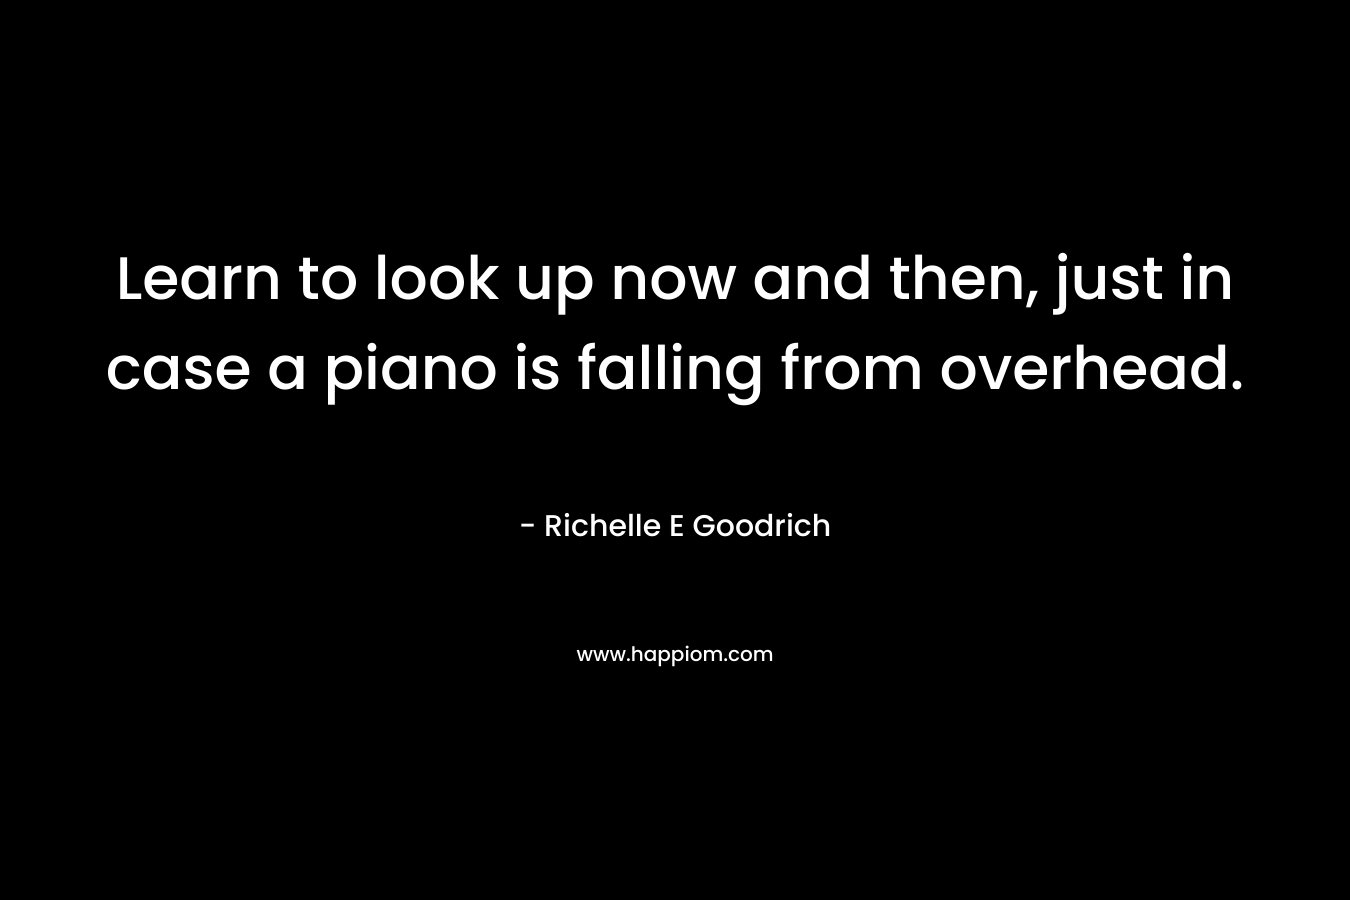 Learn to look up now and then, just in case a piano is falling from overhead. – Richelle E Goodrich